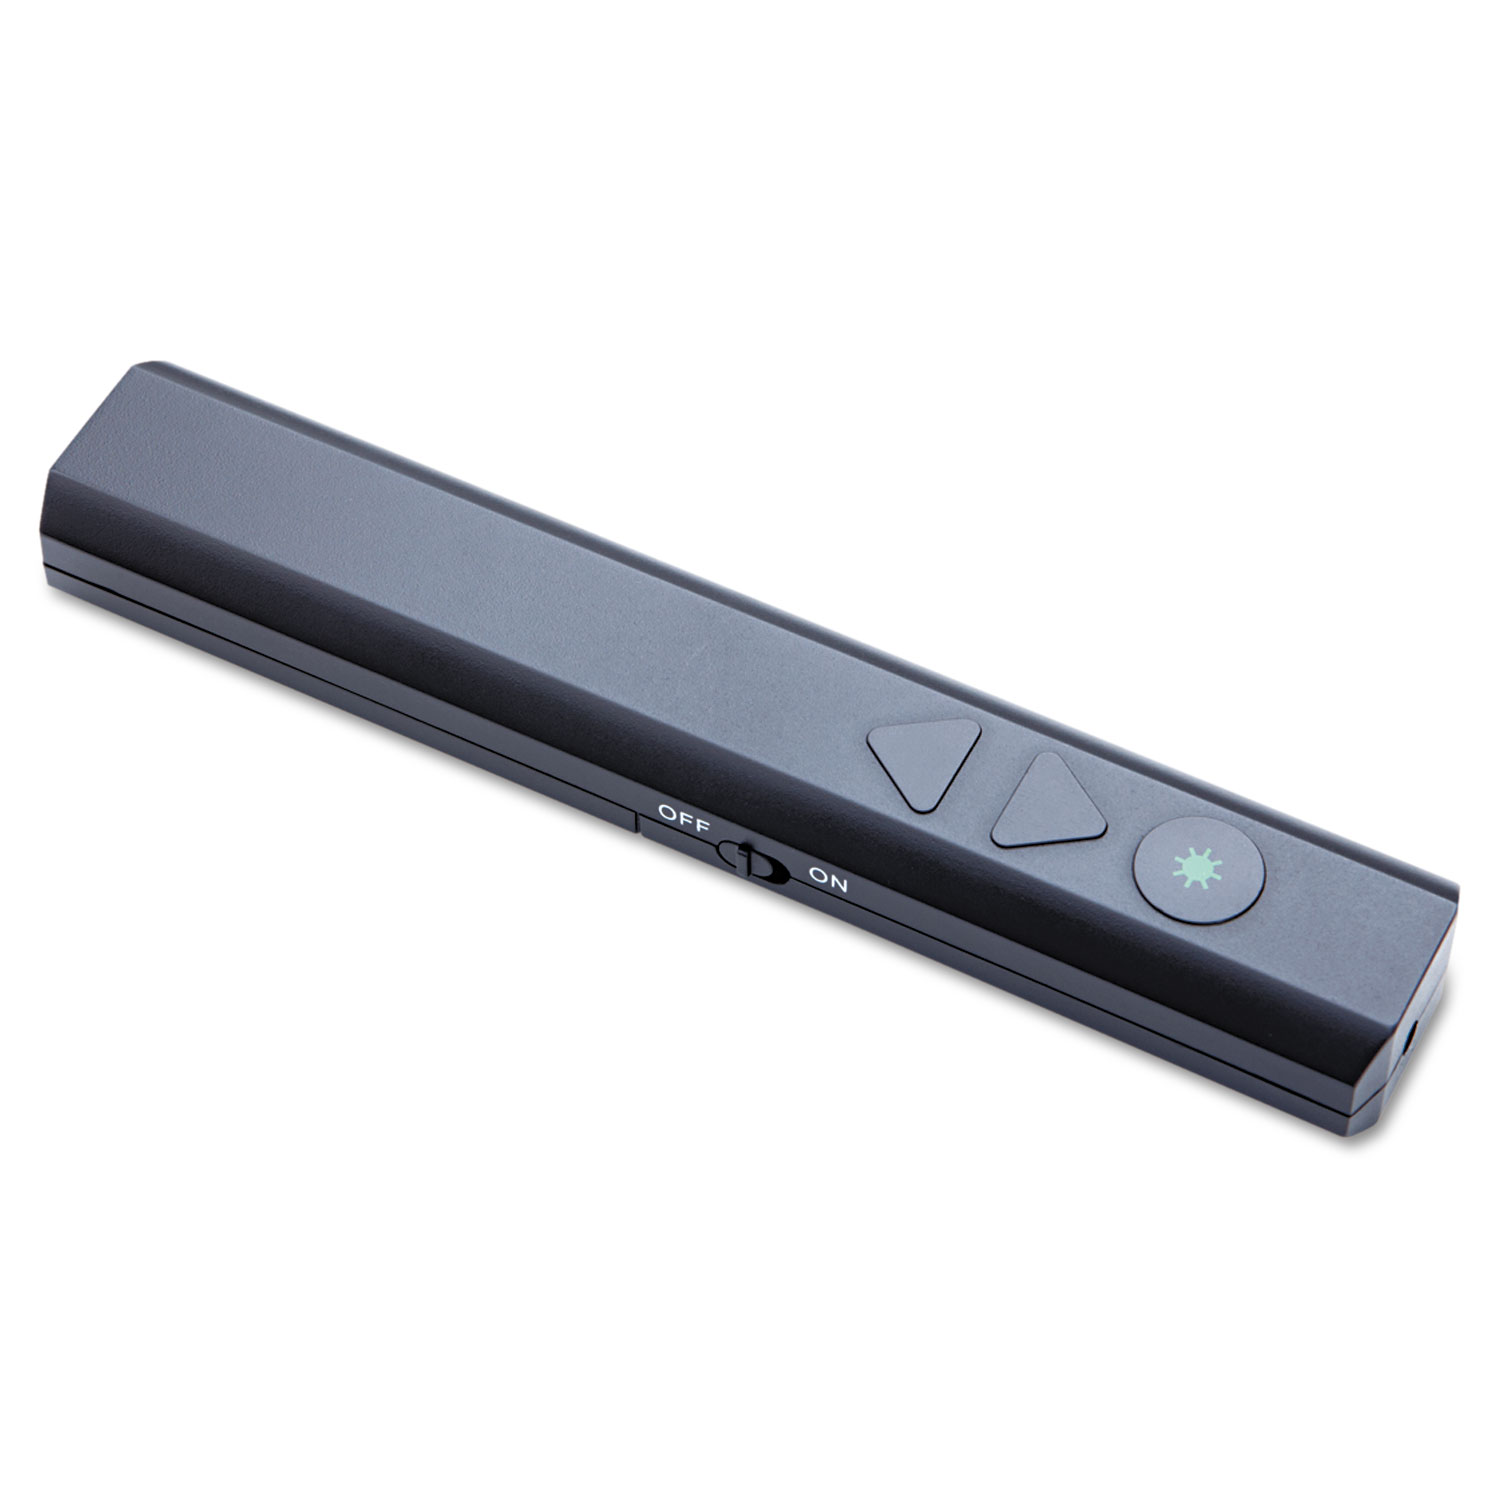 Remote and Green Laser Pointer, Class 3A, Black